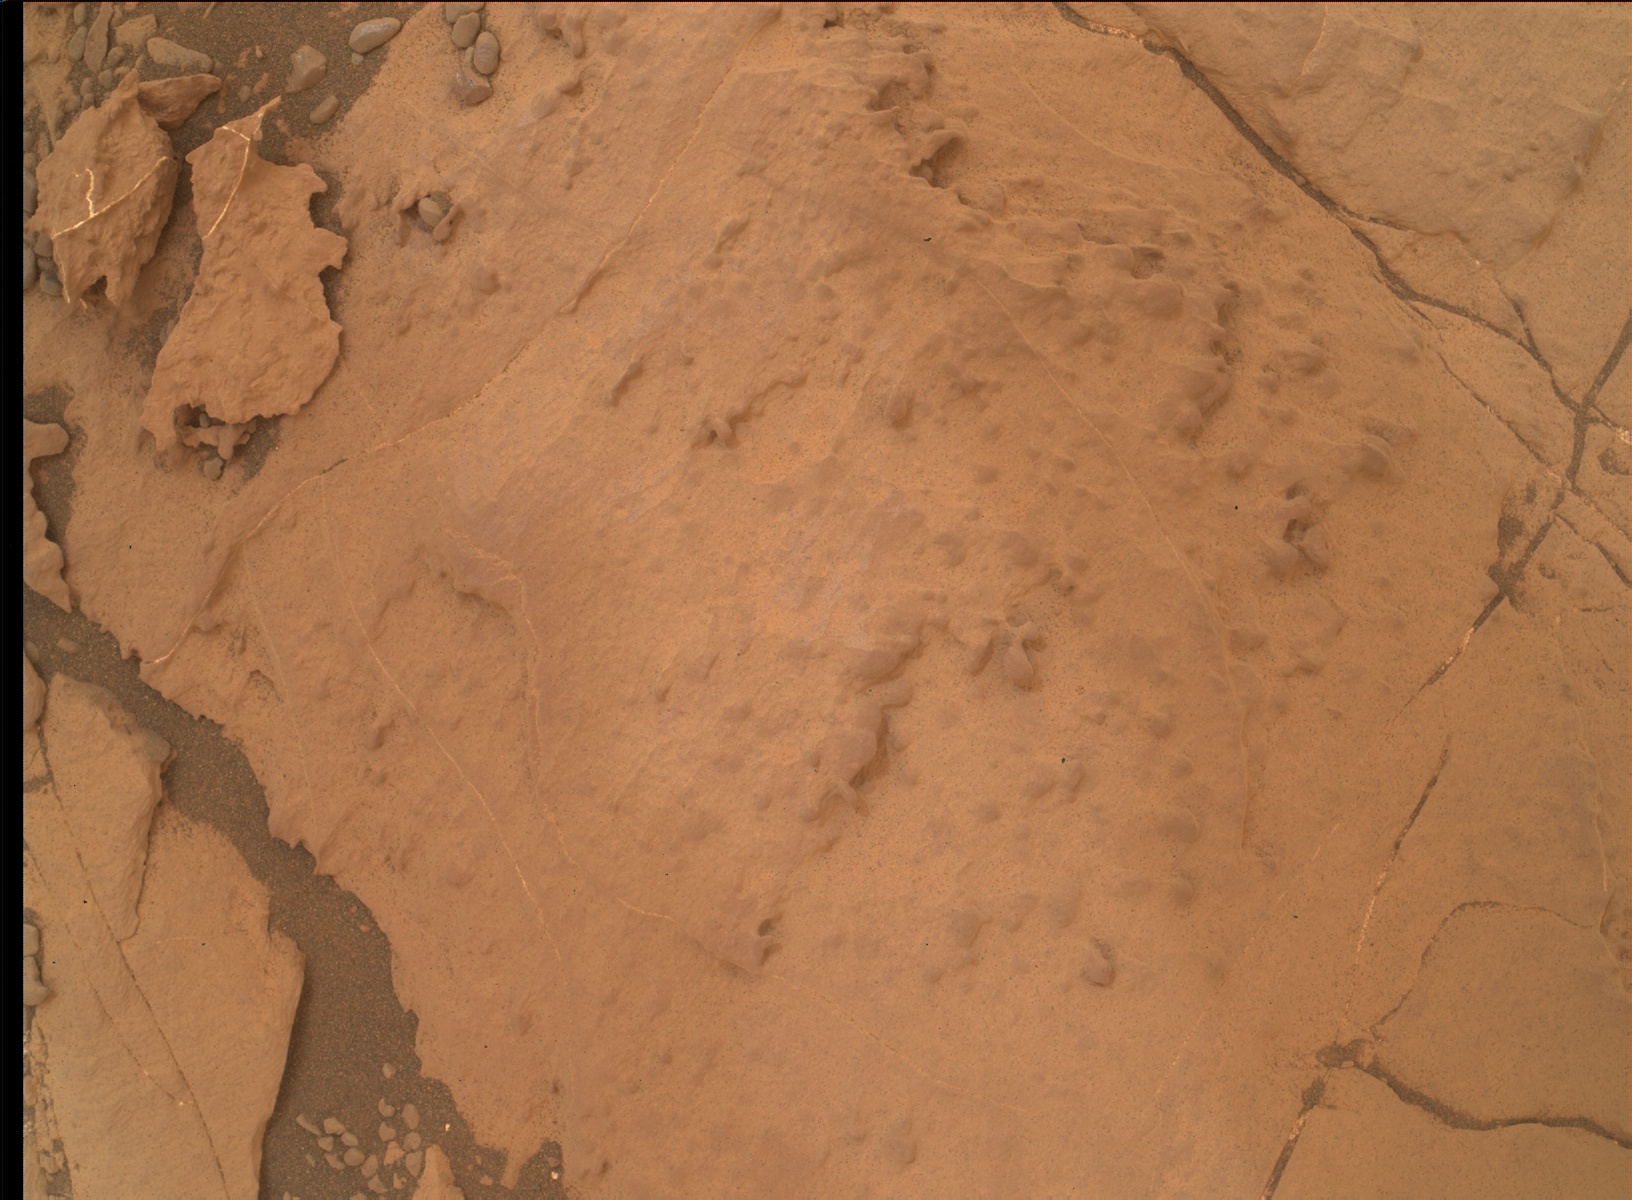 Nasa's Mars rover Curiosity acquired this image using its Mars Hand Lens Imager (MAHLI) on Sol 2122